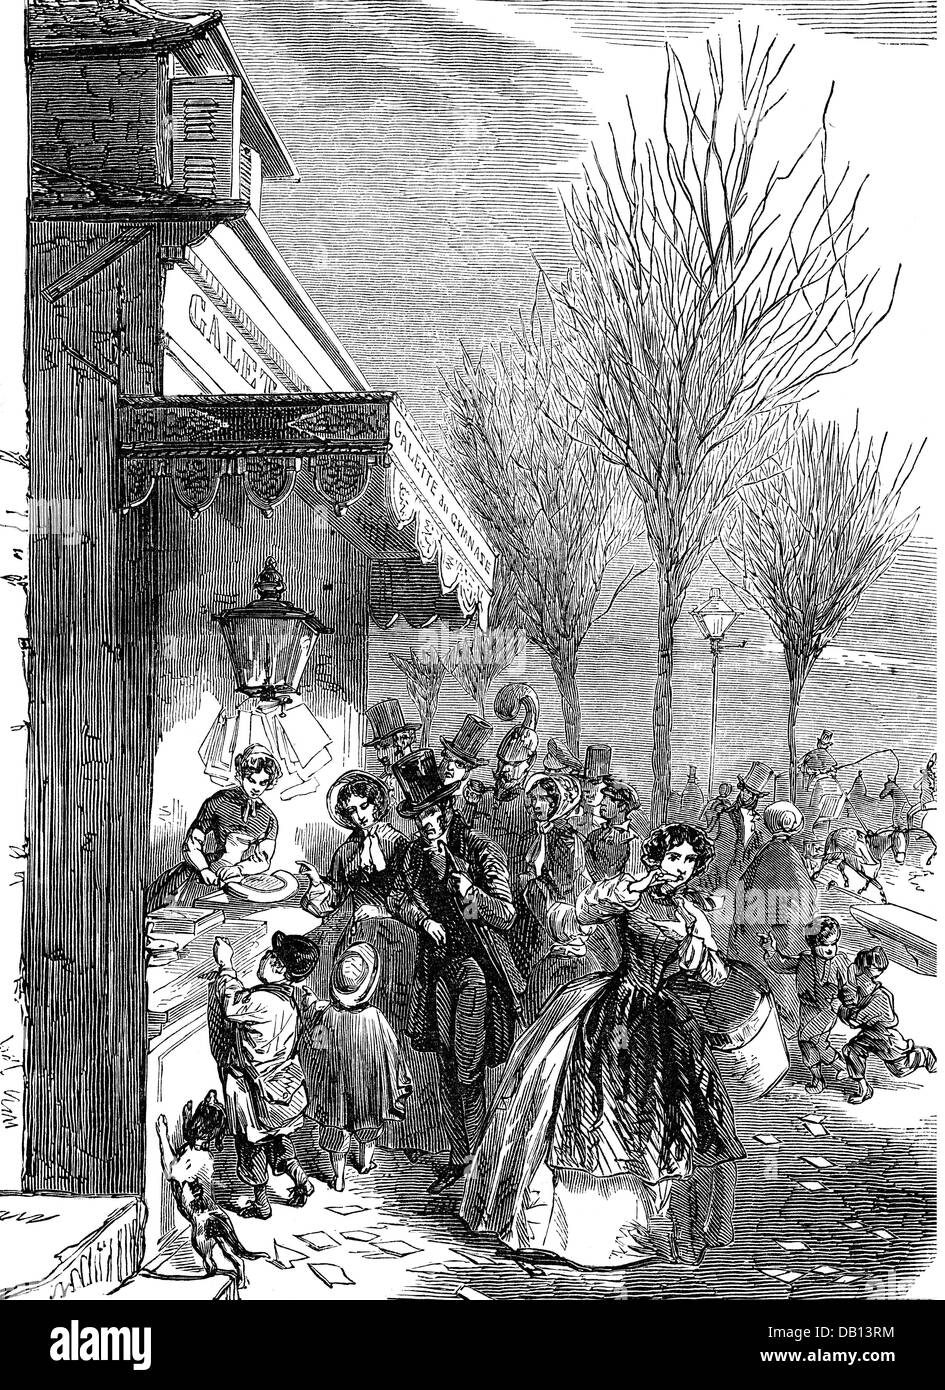 trade, food, cakes from 'Galette du Gymnase', Paris, wood engraving, 1853, Additional-Rights-Clearences-Not Available Stock Photo